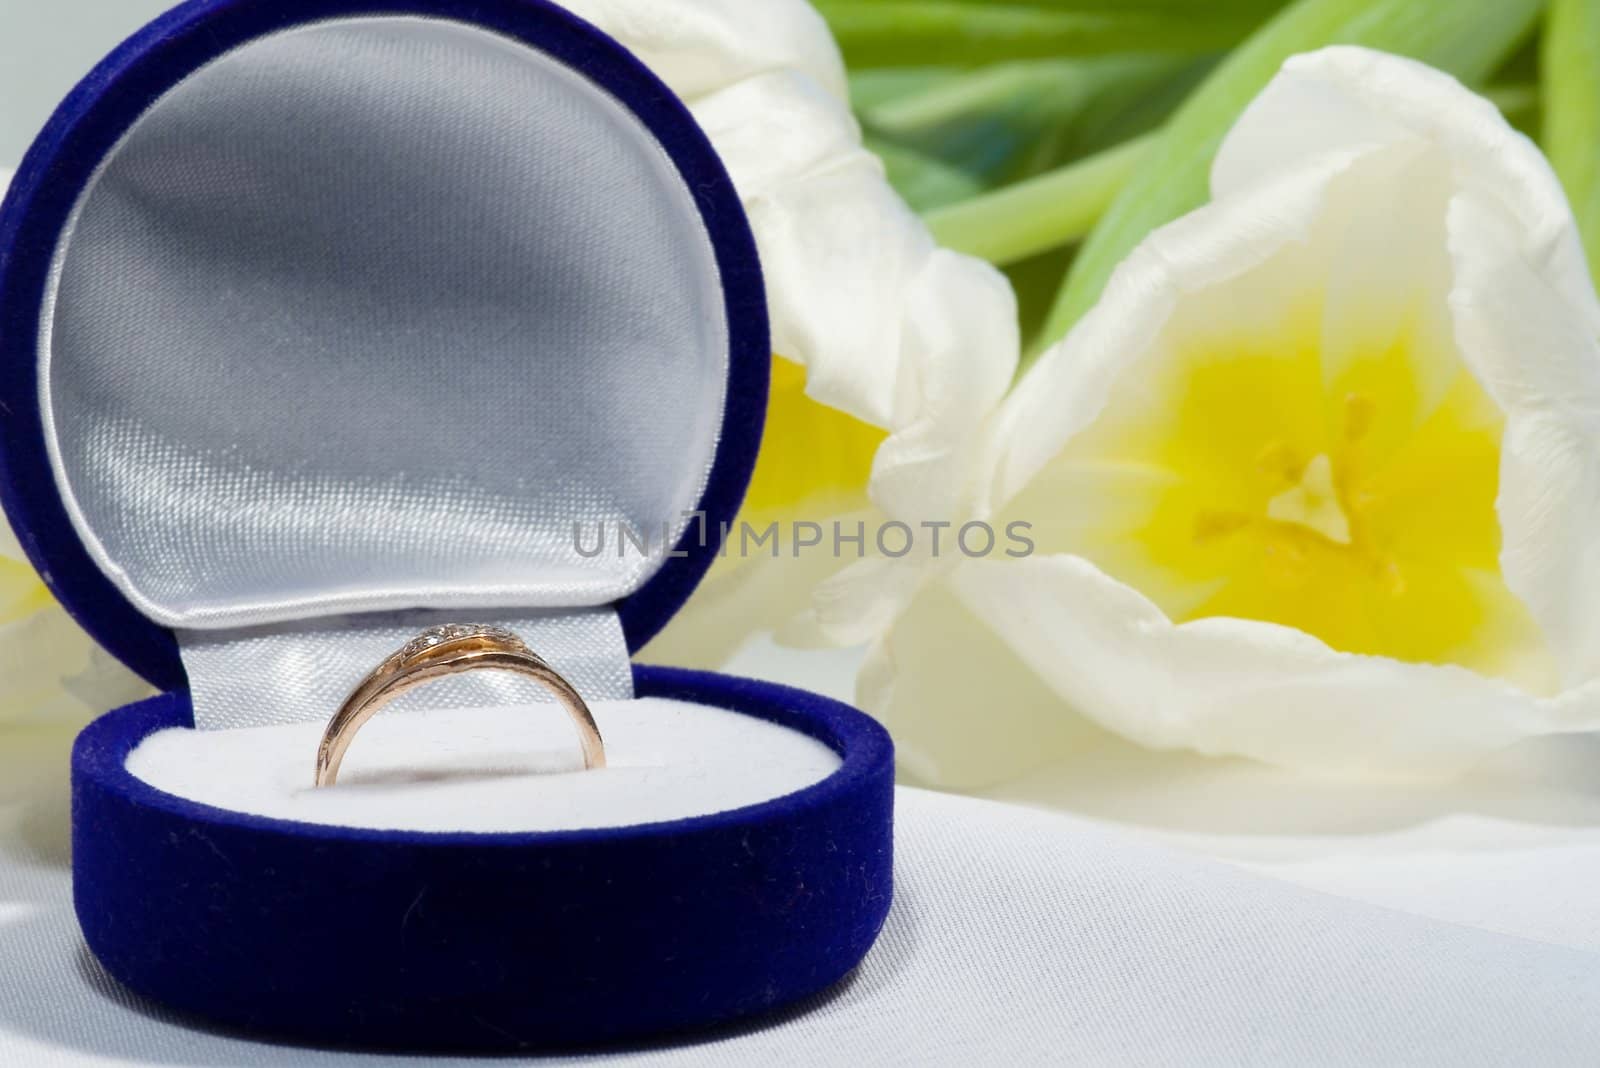 Gold ring with tulip. Gift.